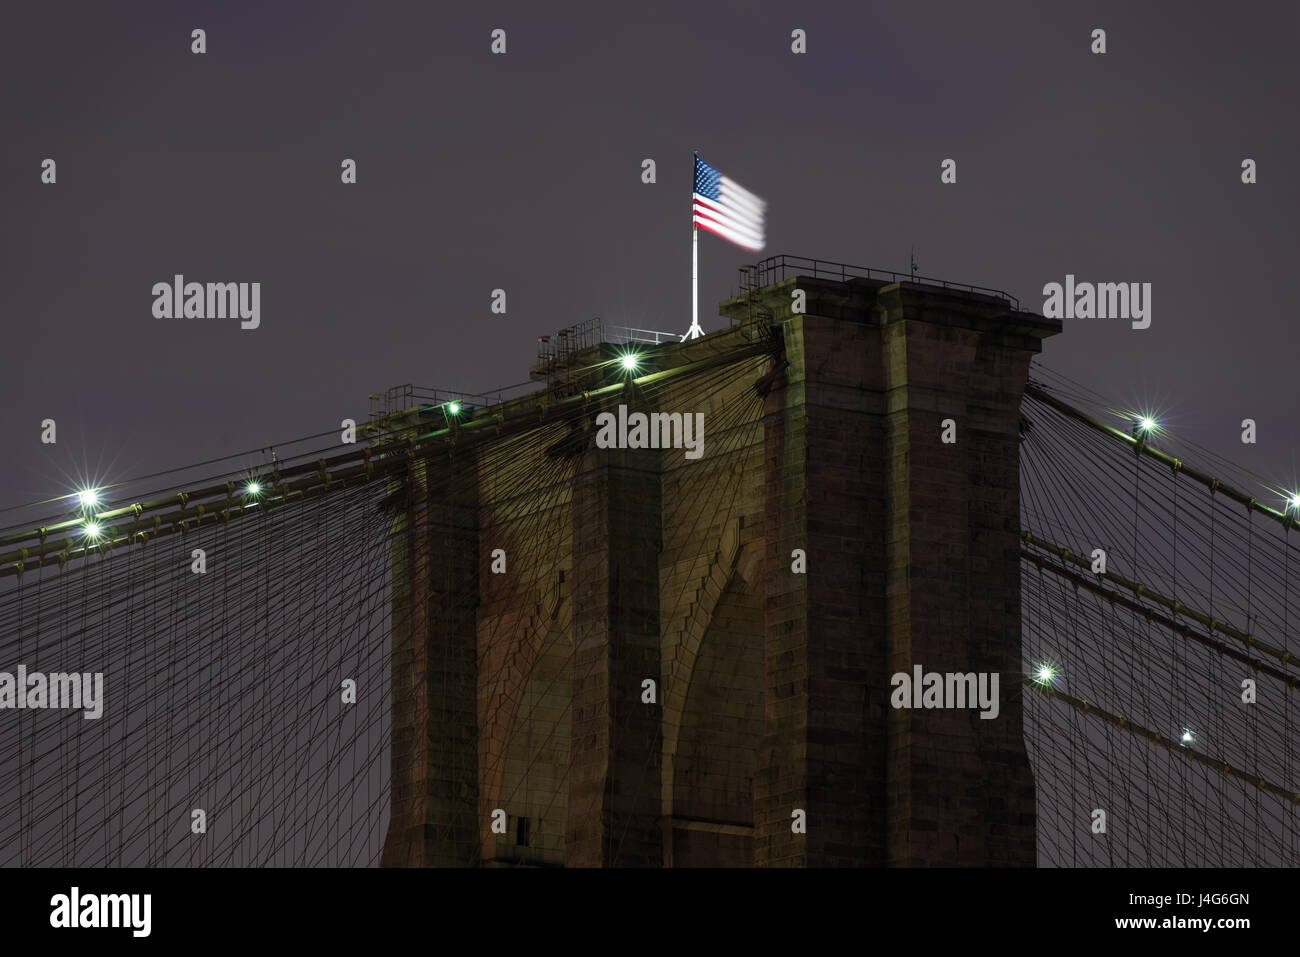 Detail View Of American Flag In Wind On Brooklyn Bridge, New York, USA Stock Photo